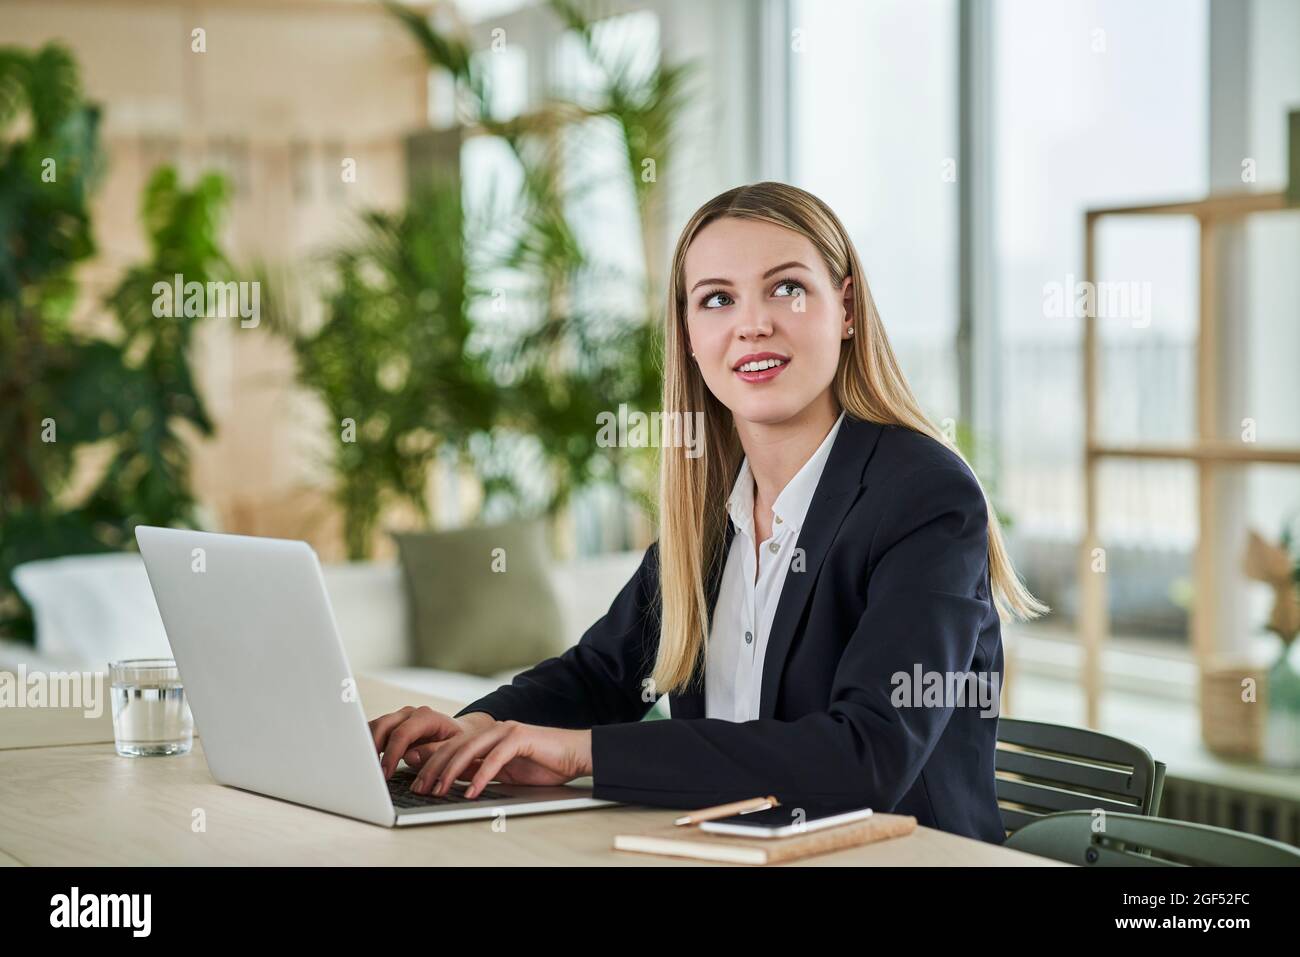 Blond female intern looking away while sitting with laptop at desk in office Stock Photo